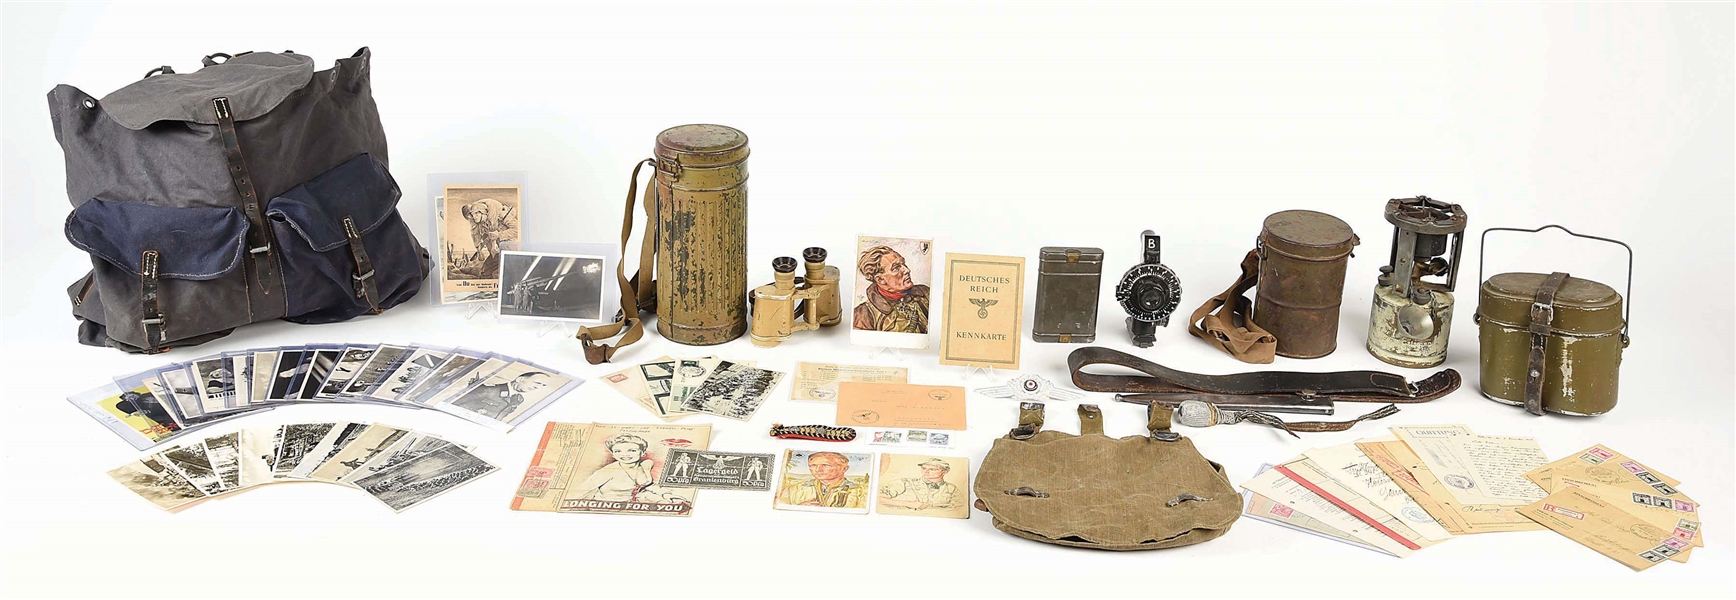 LOT OF GERMAN WWII MILITARY FIELD GEAR ANS MISCELLANEOUS PAPER ITEMS.